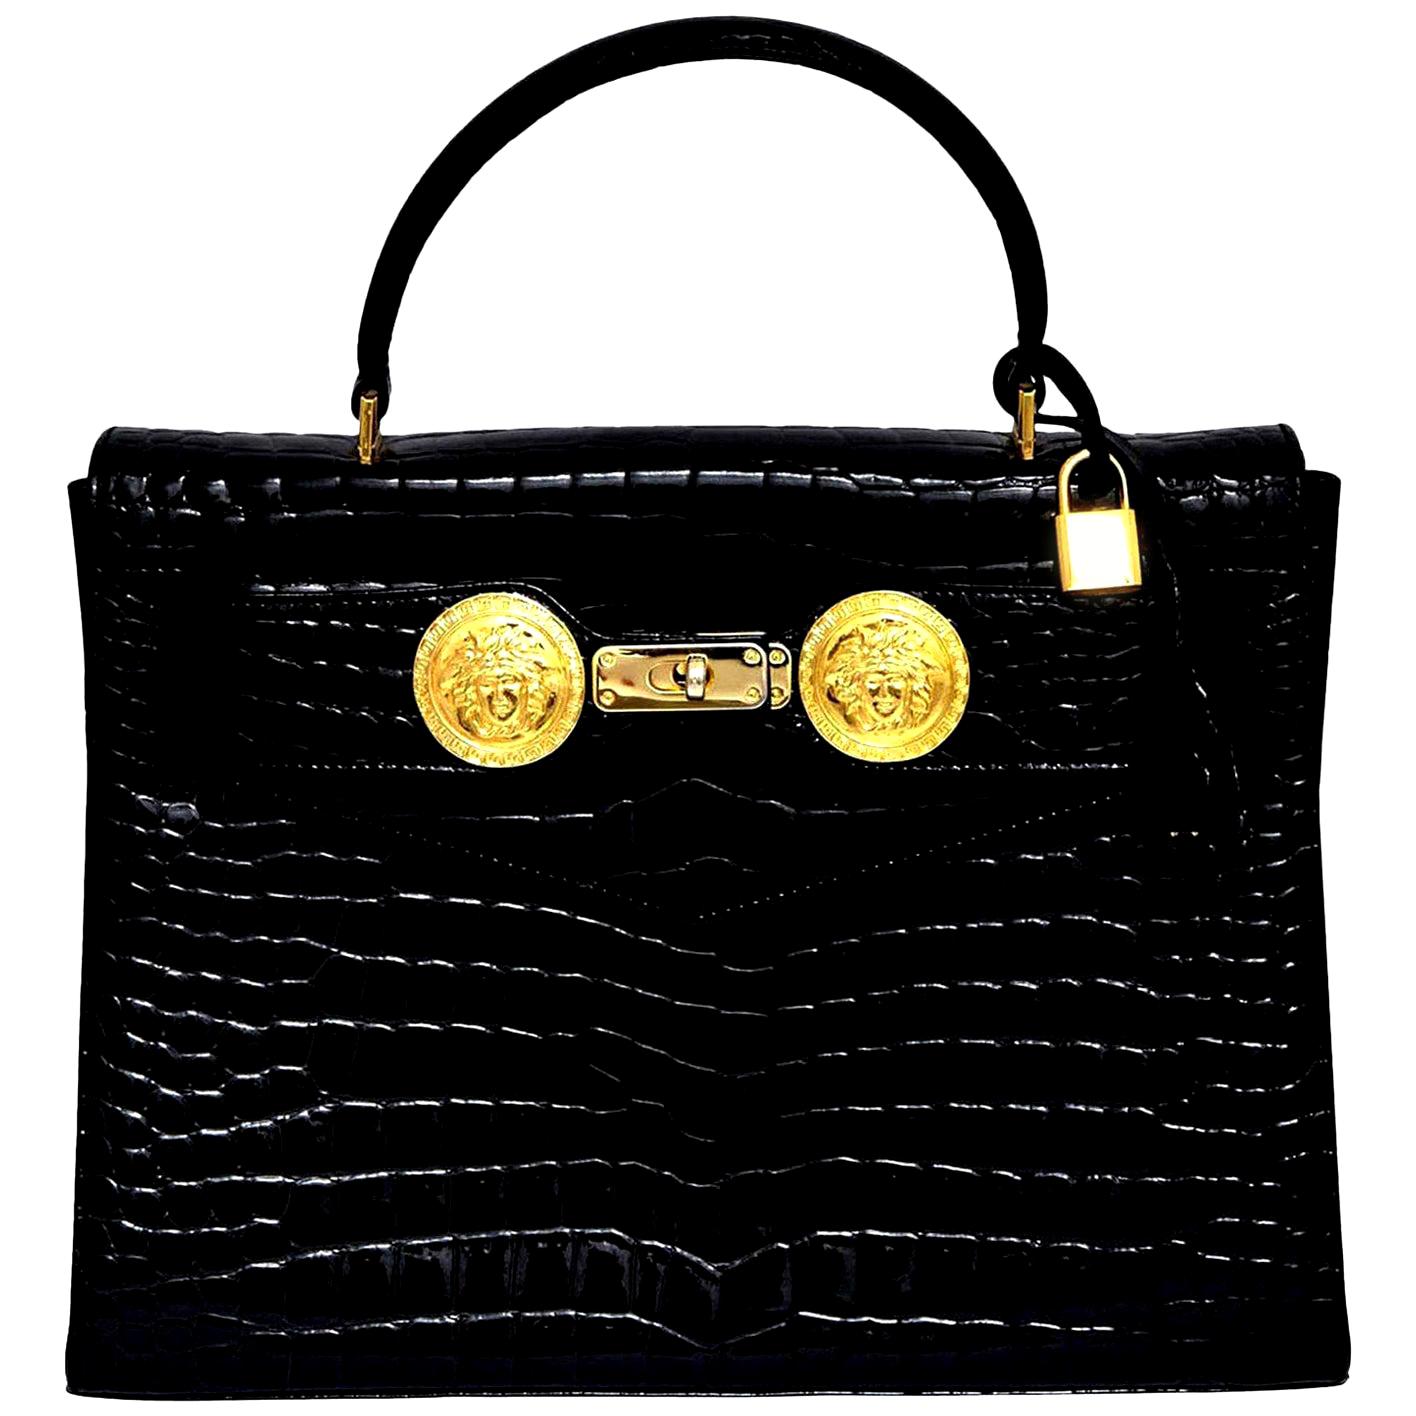 Gianni Versace Croc Embossed Couture Bag With Medusas For Sale